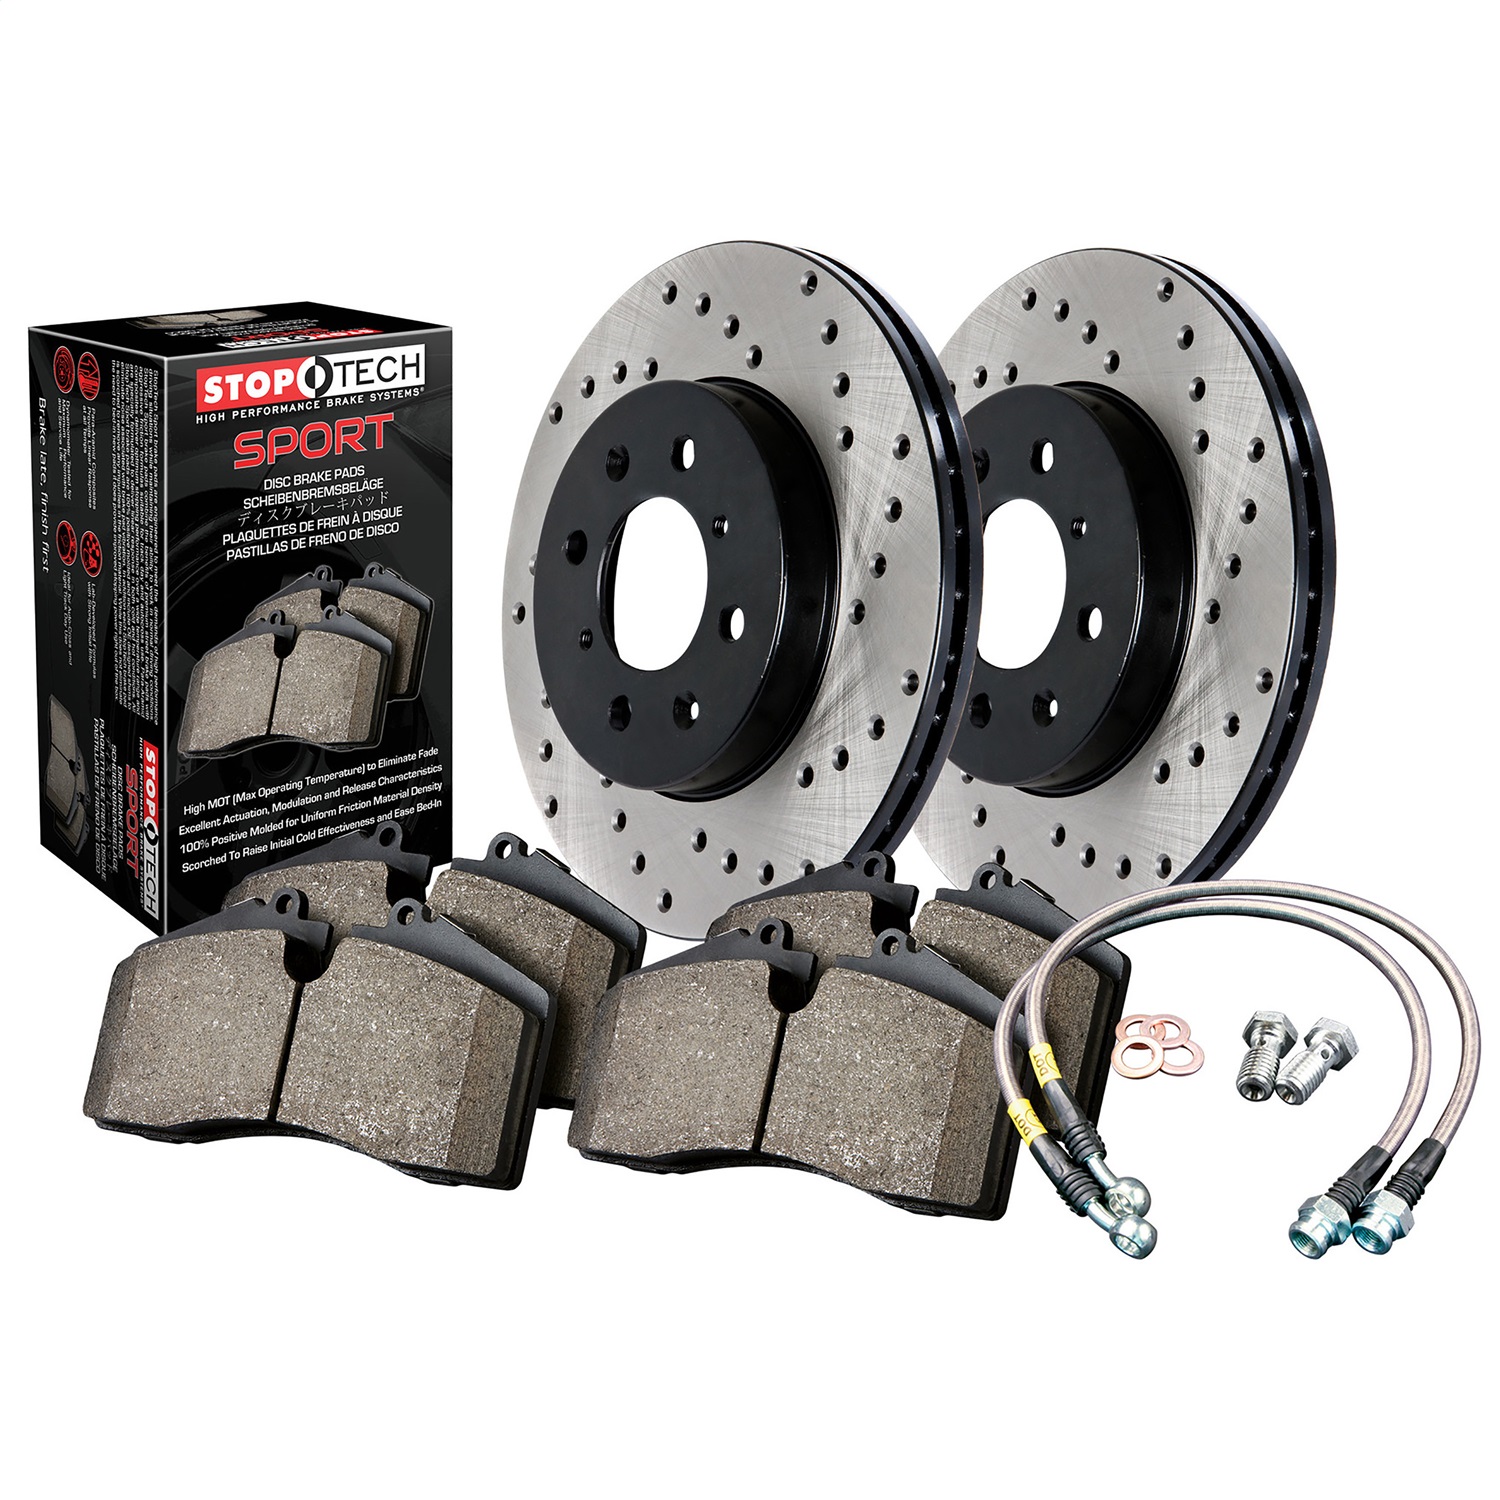 StopTech 979.45001R Sport Disc Brake Kit w/Cross-Drilled Rotors Fits 04-13 3